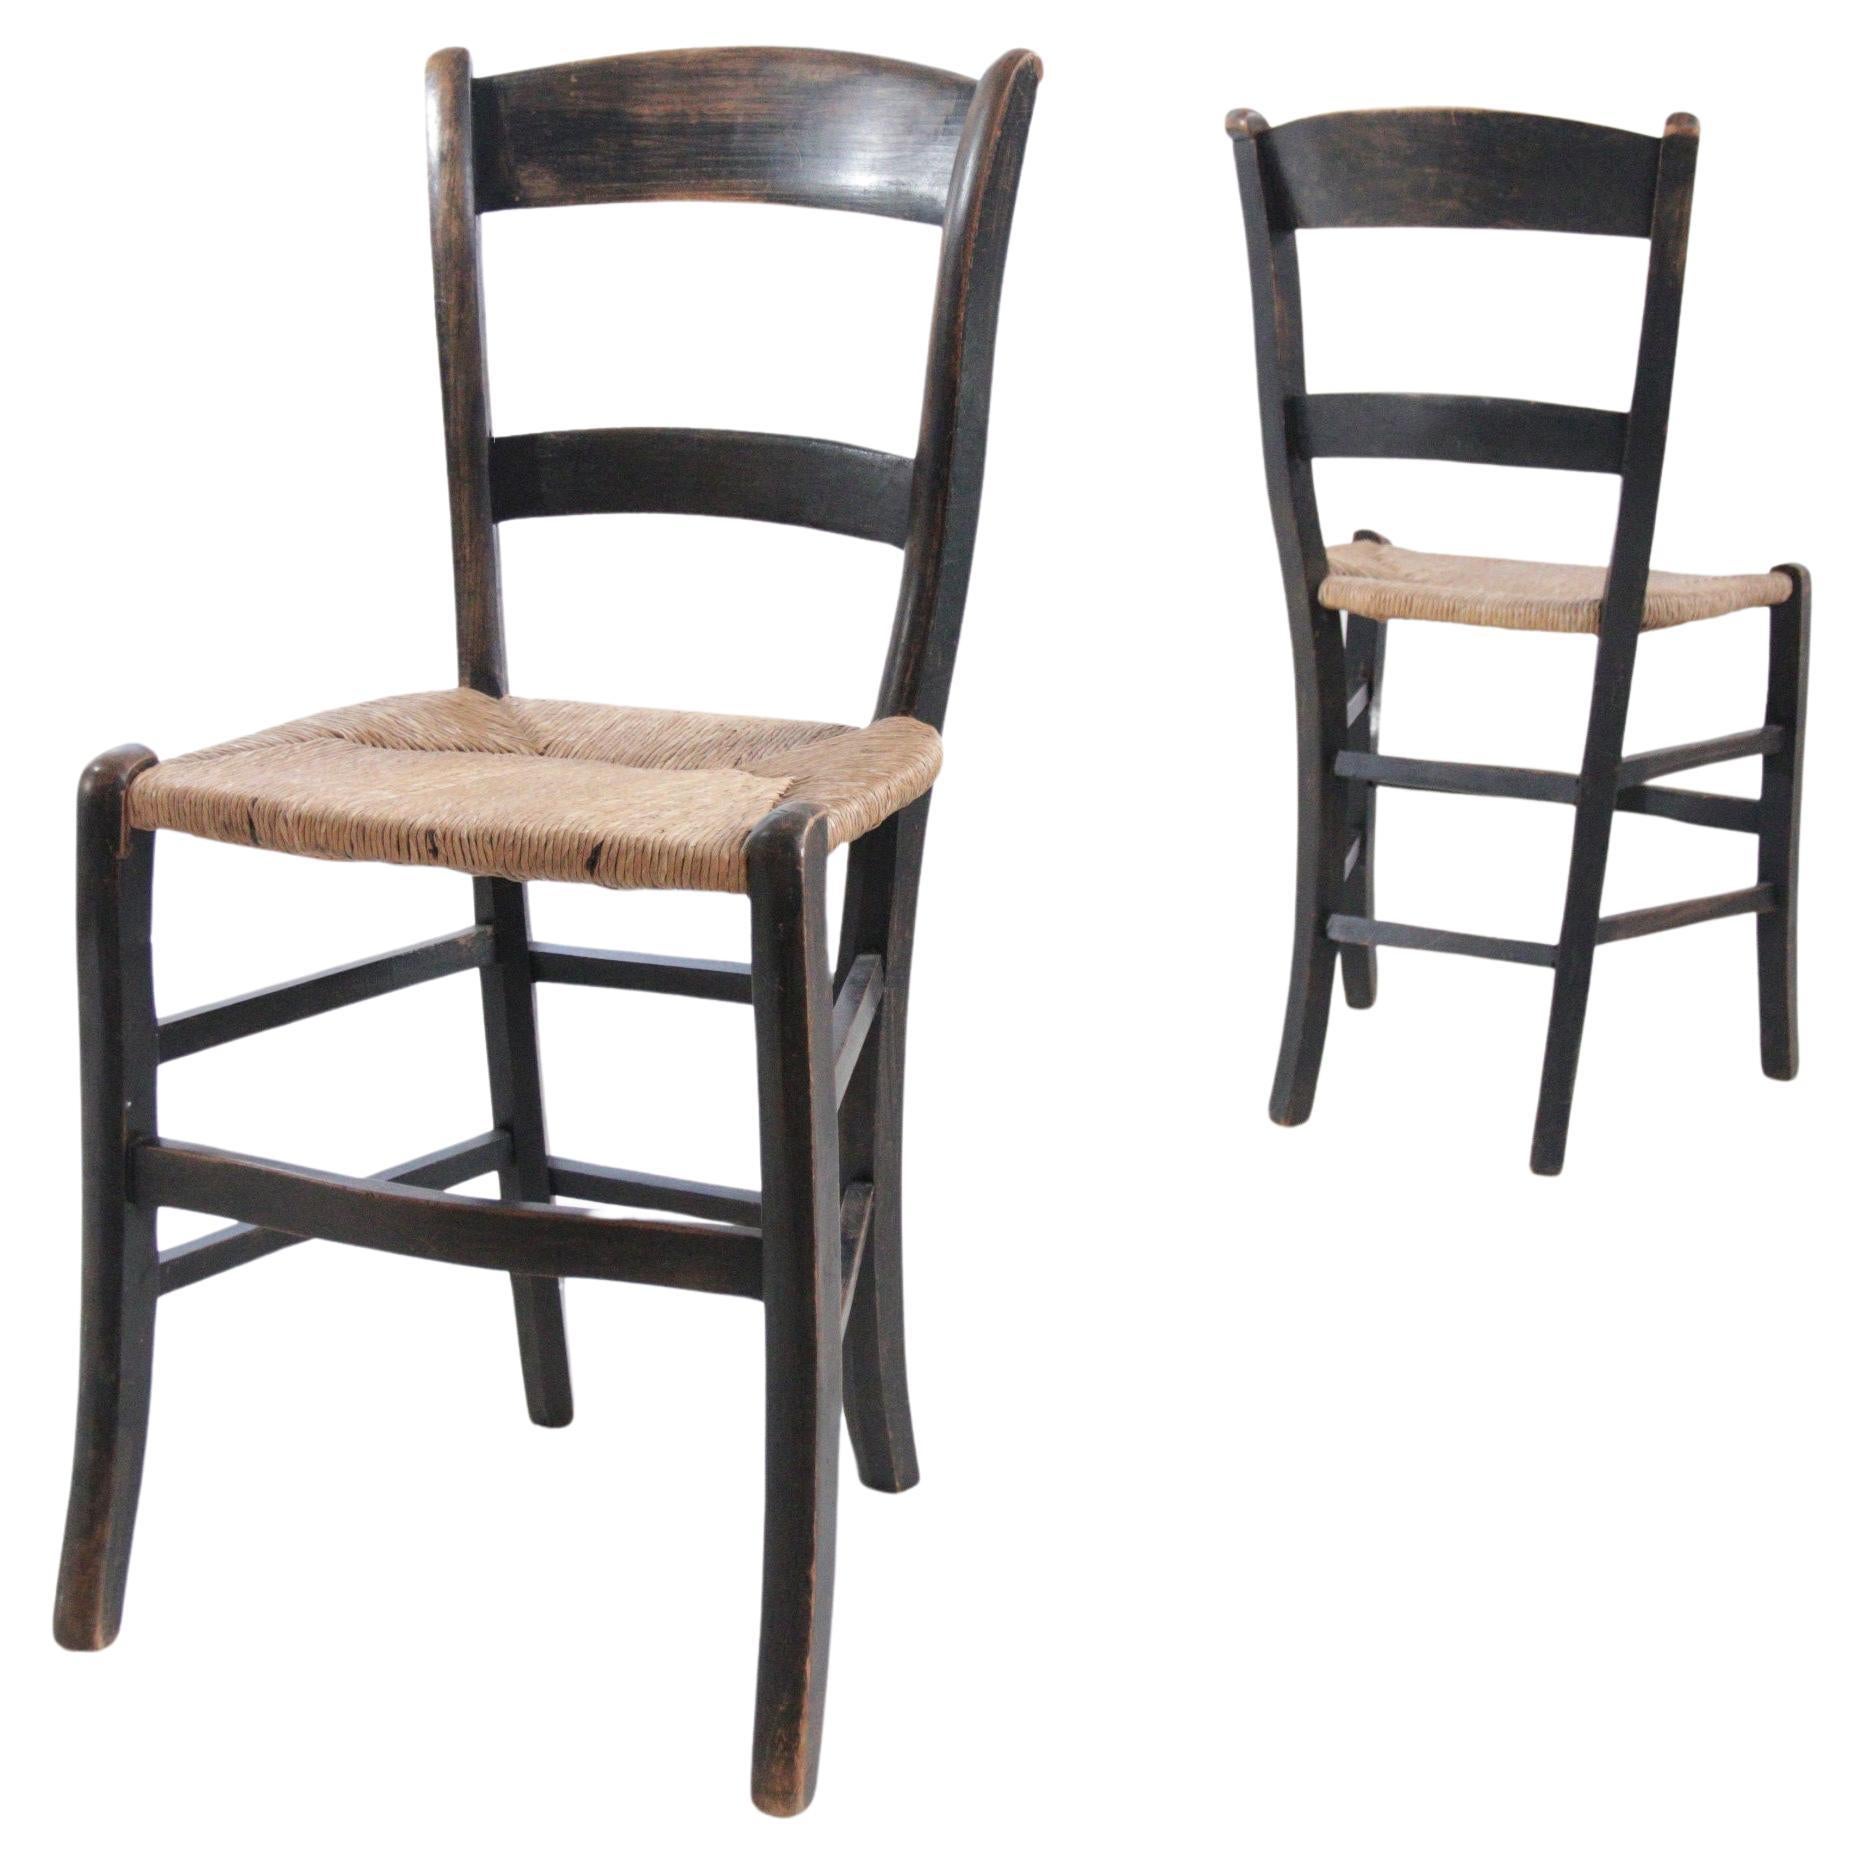 Set of two Rural French Rush chairs